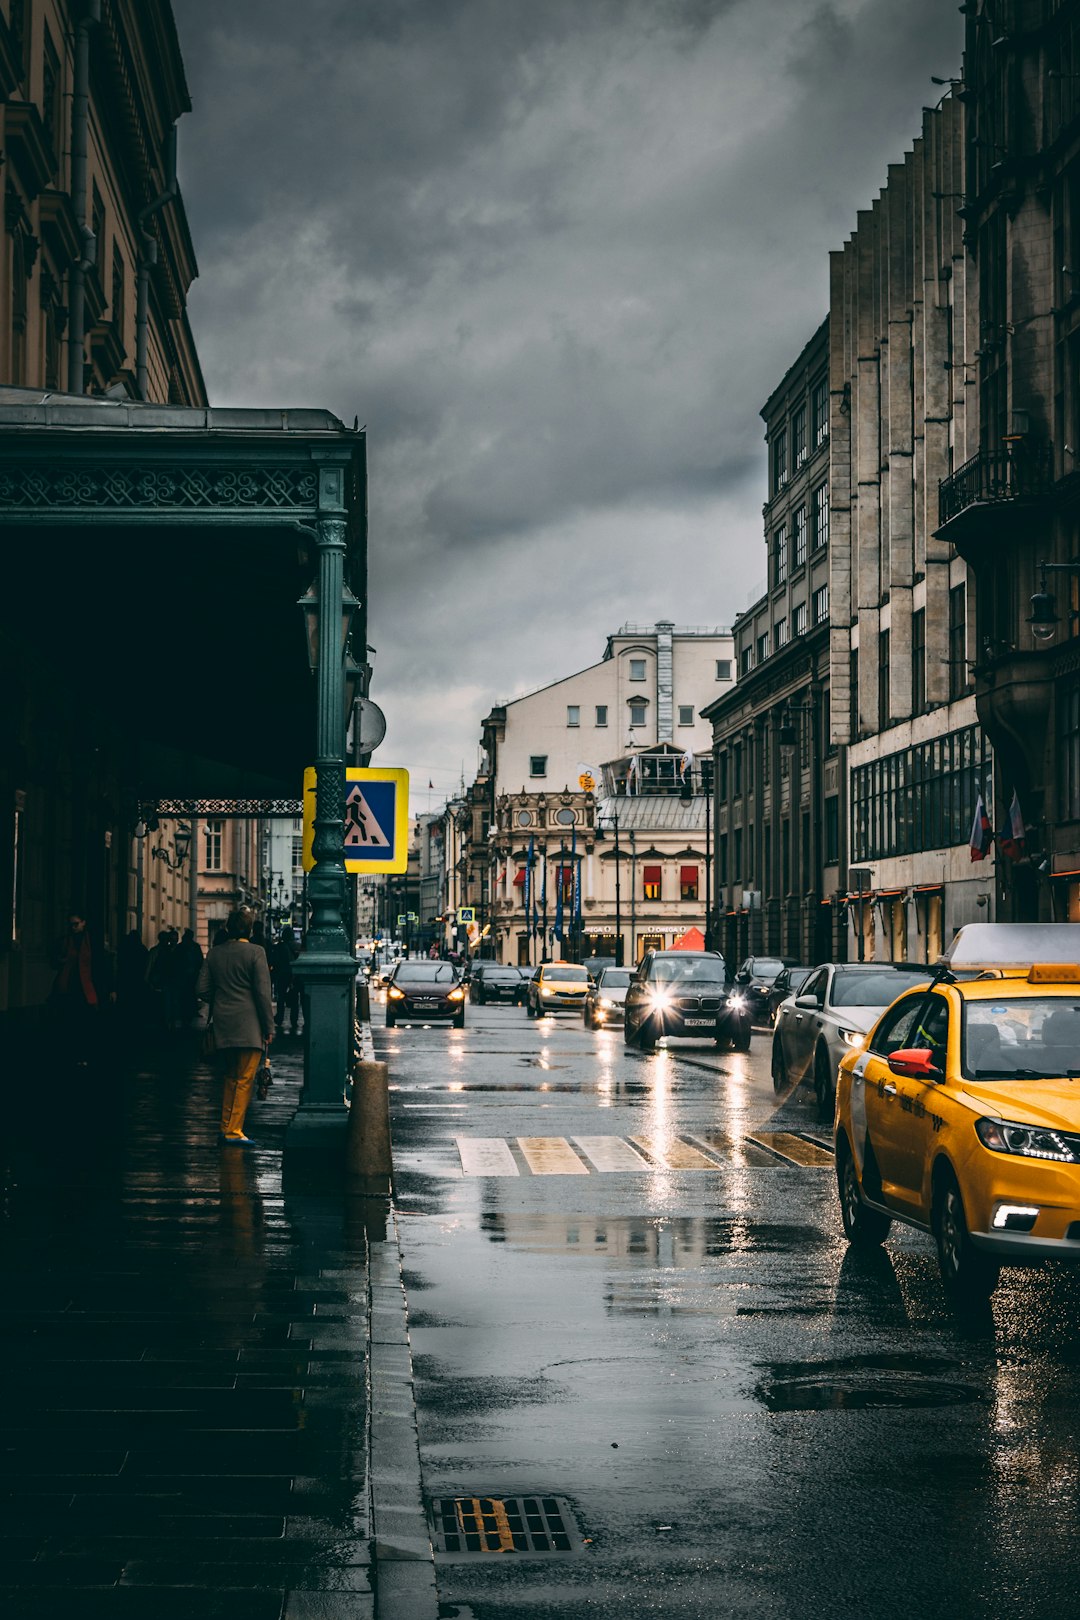 Street, wet, wet street and street view HD photo by ...